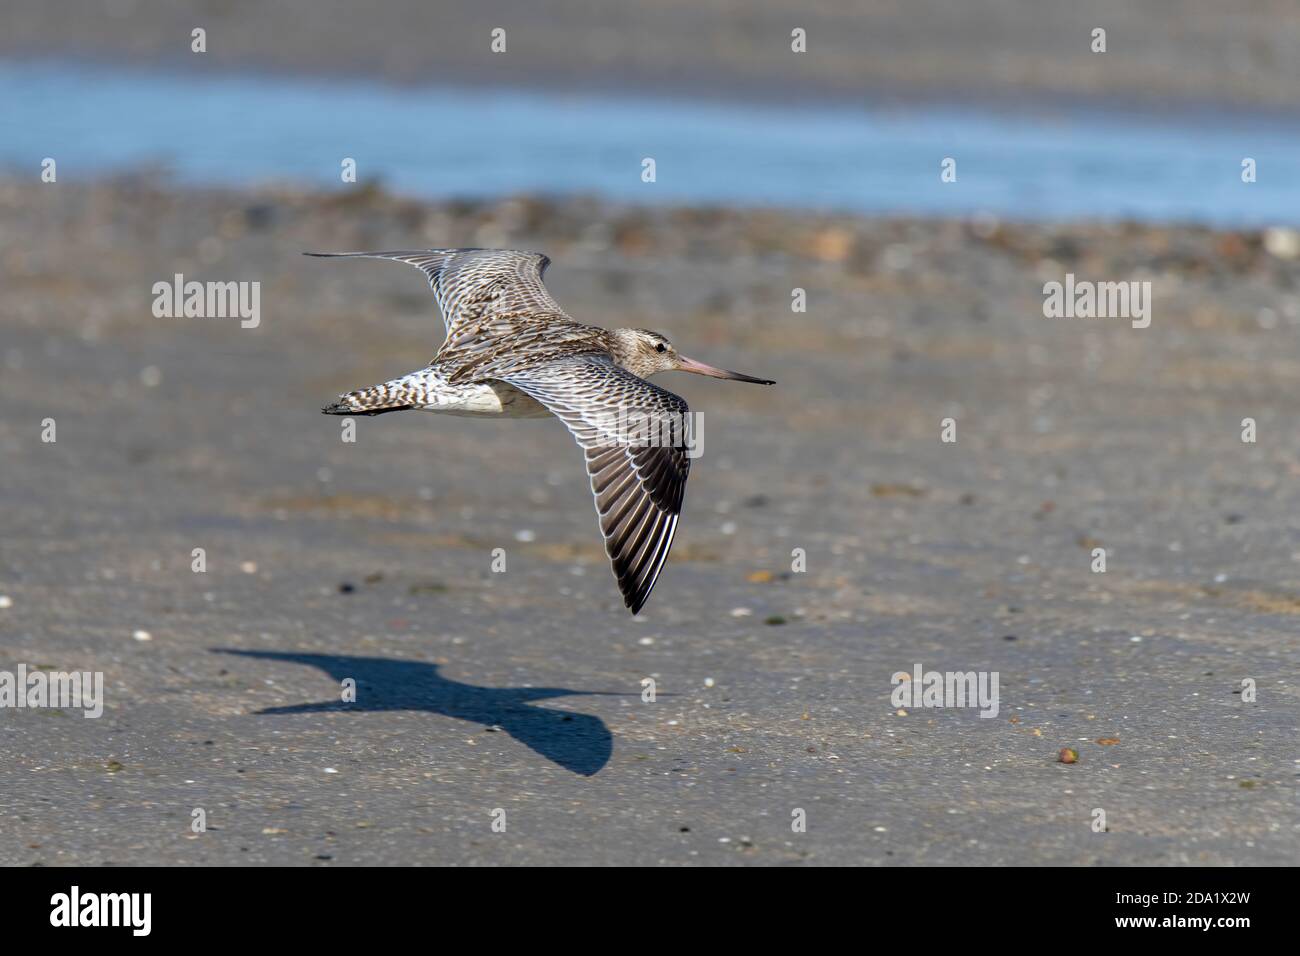 Bar-tailed Godwit  Limosa lapponica Cains, Queensland, Australia 31 October 2019       Adult in flight.       Scolopacidae Stock Photo